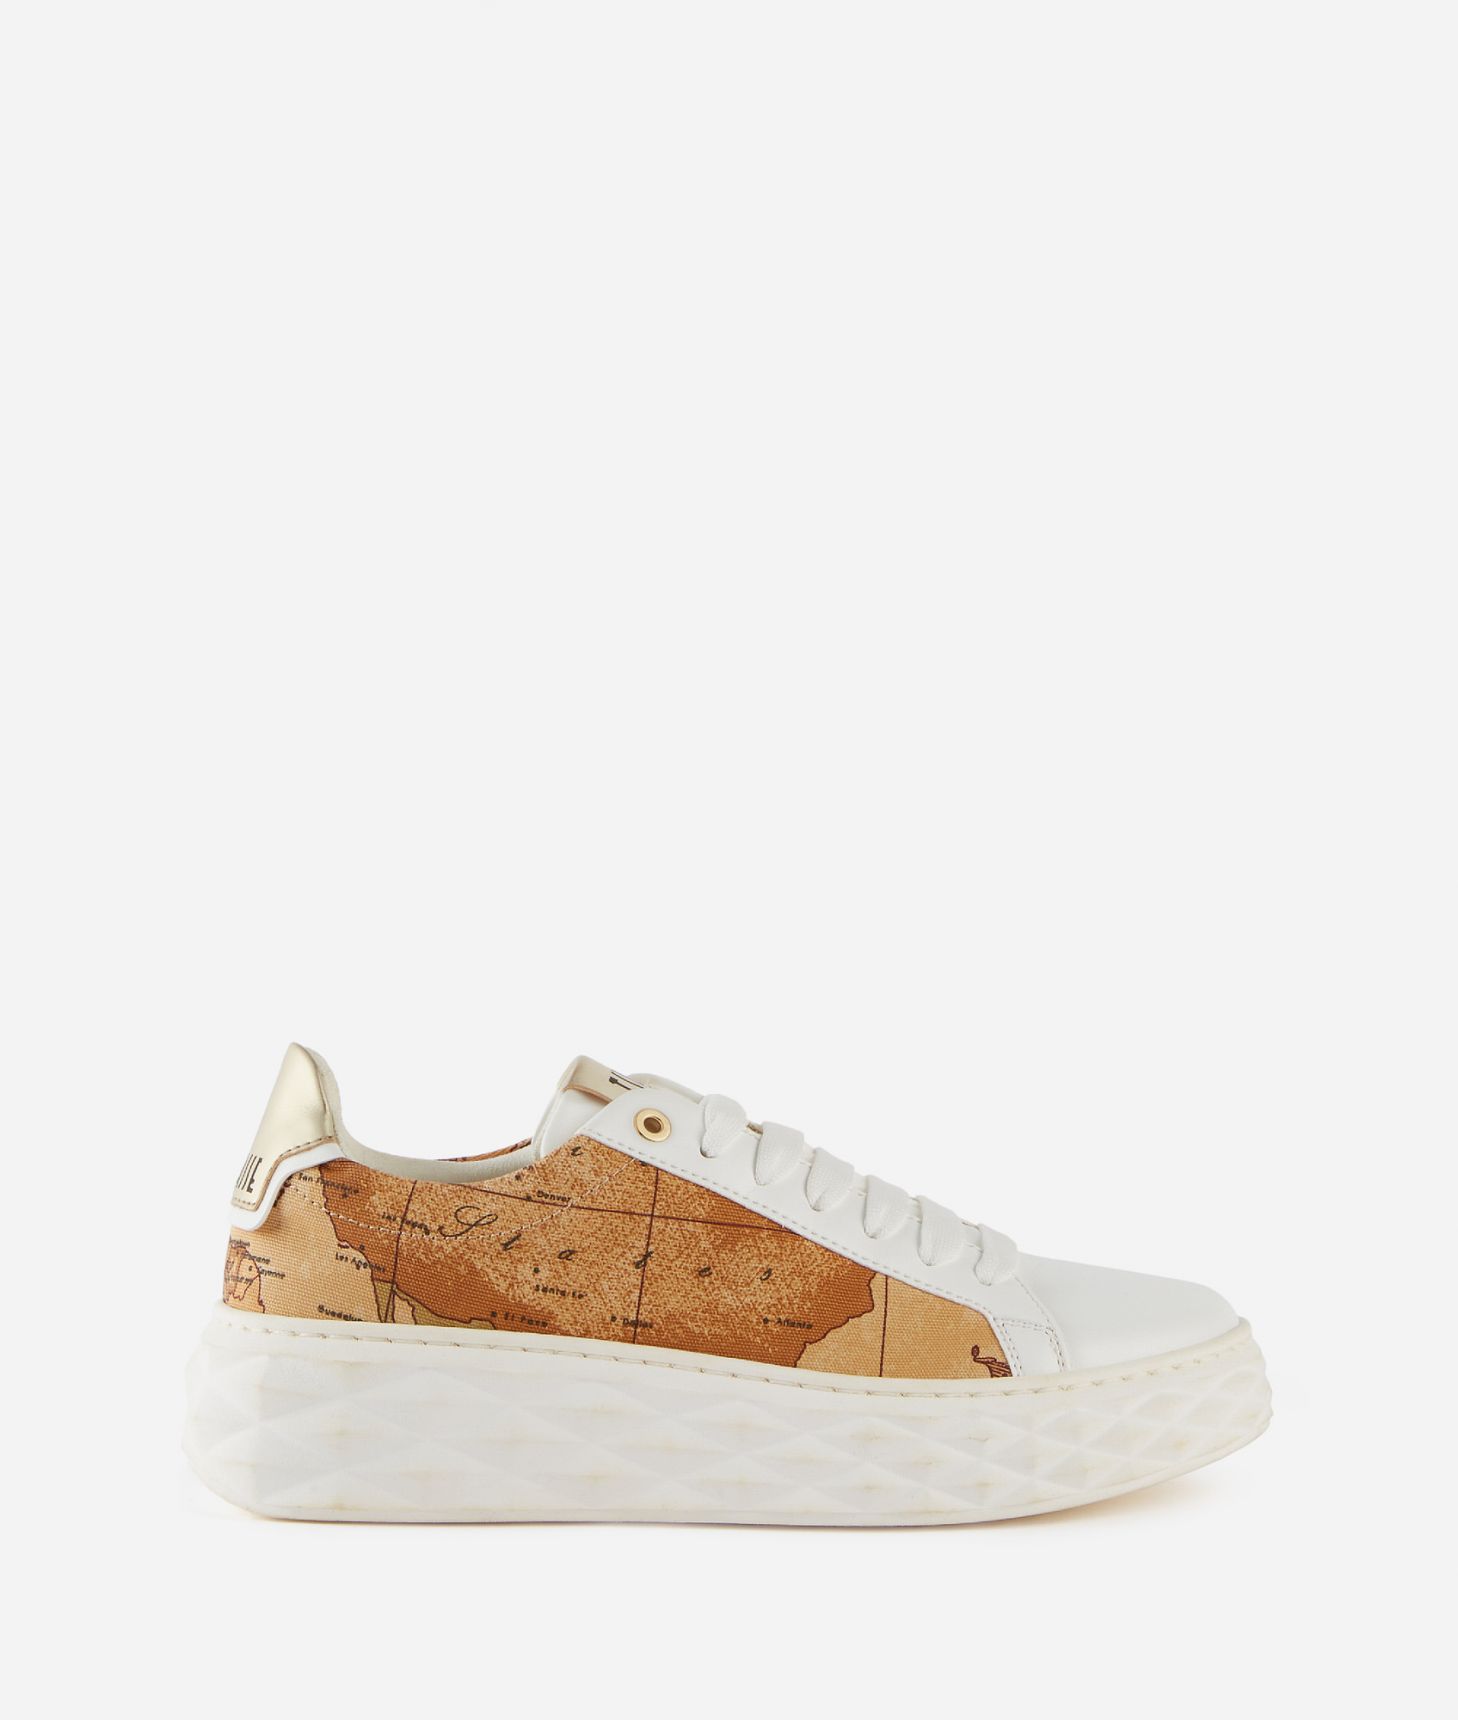 Reps sneakers with Geo Classic print,front